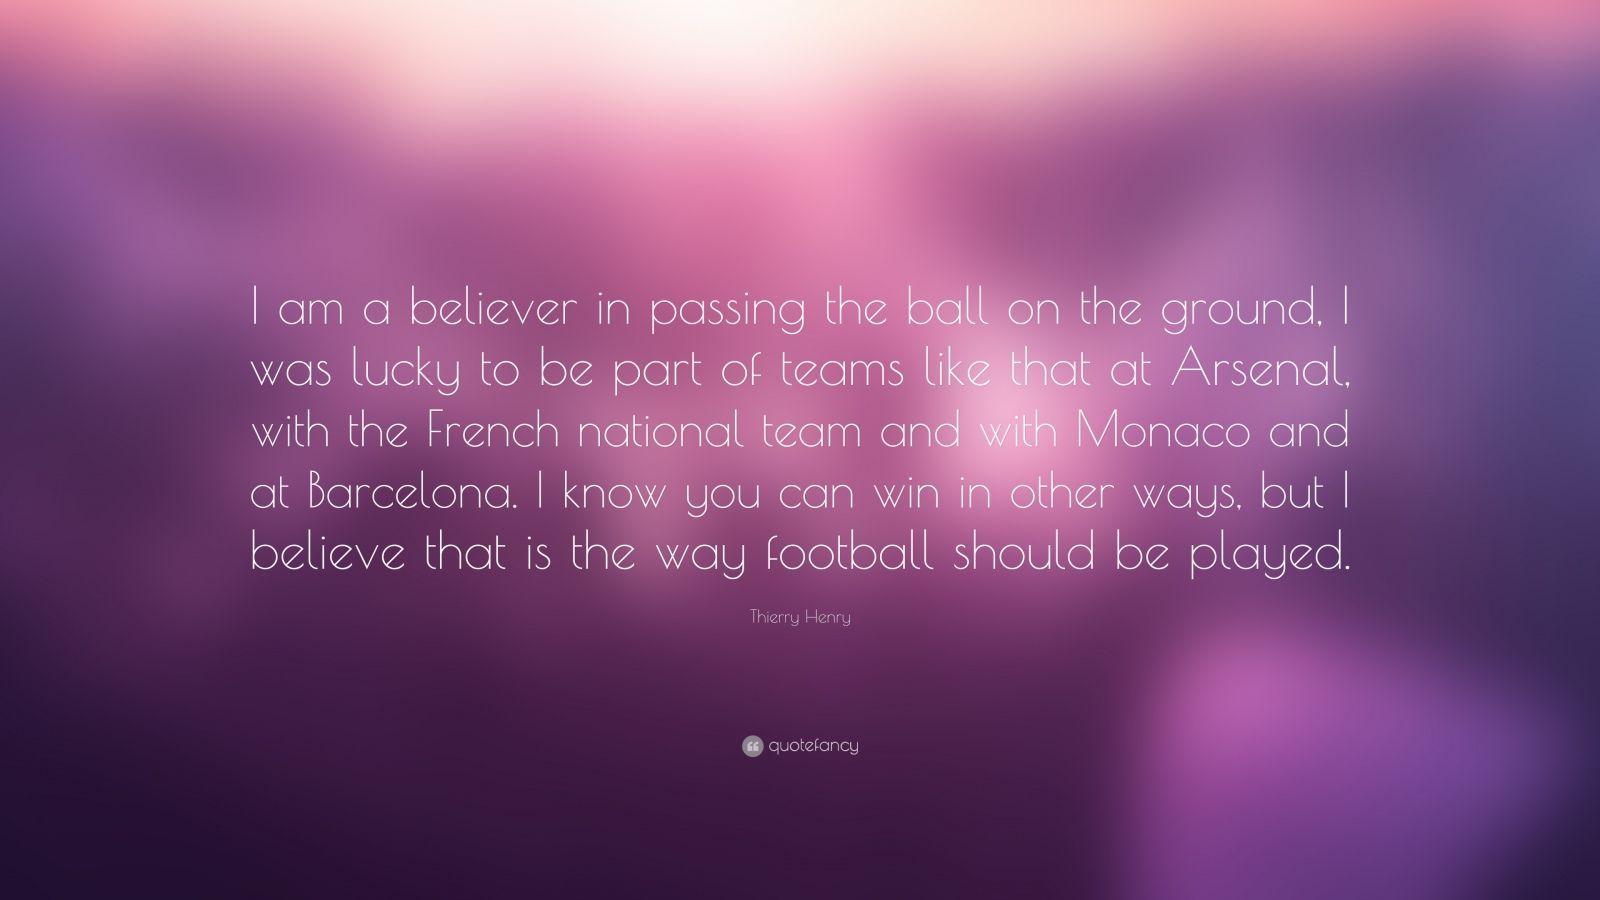 Thierry Henry Quote: “I am a believer in passing the ball on